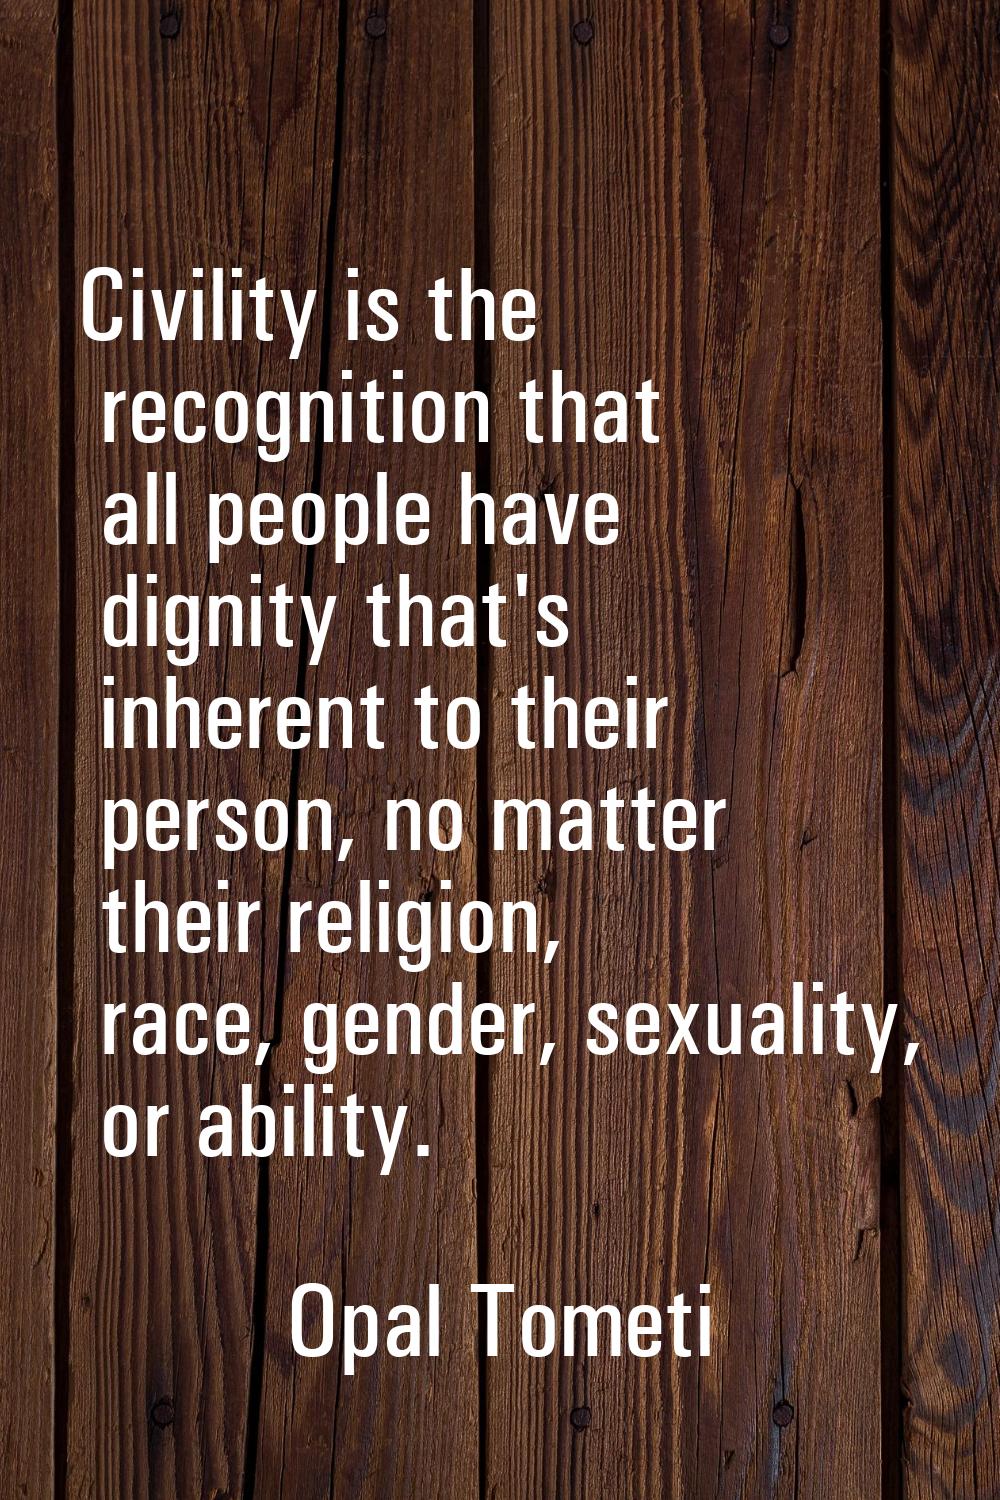 Civility is the recognition that all people have dignity that's inherent to their person, no matter